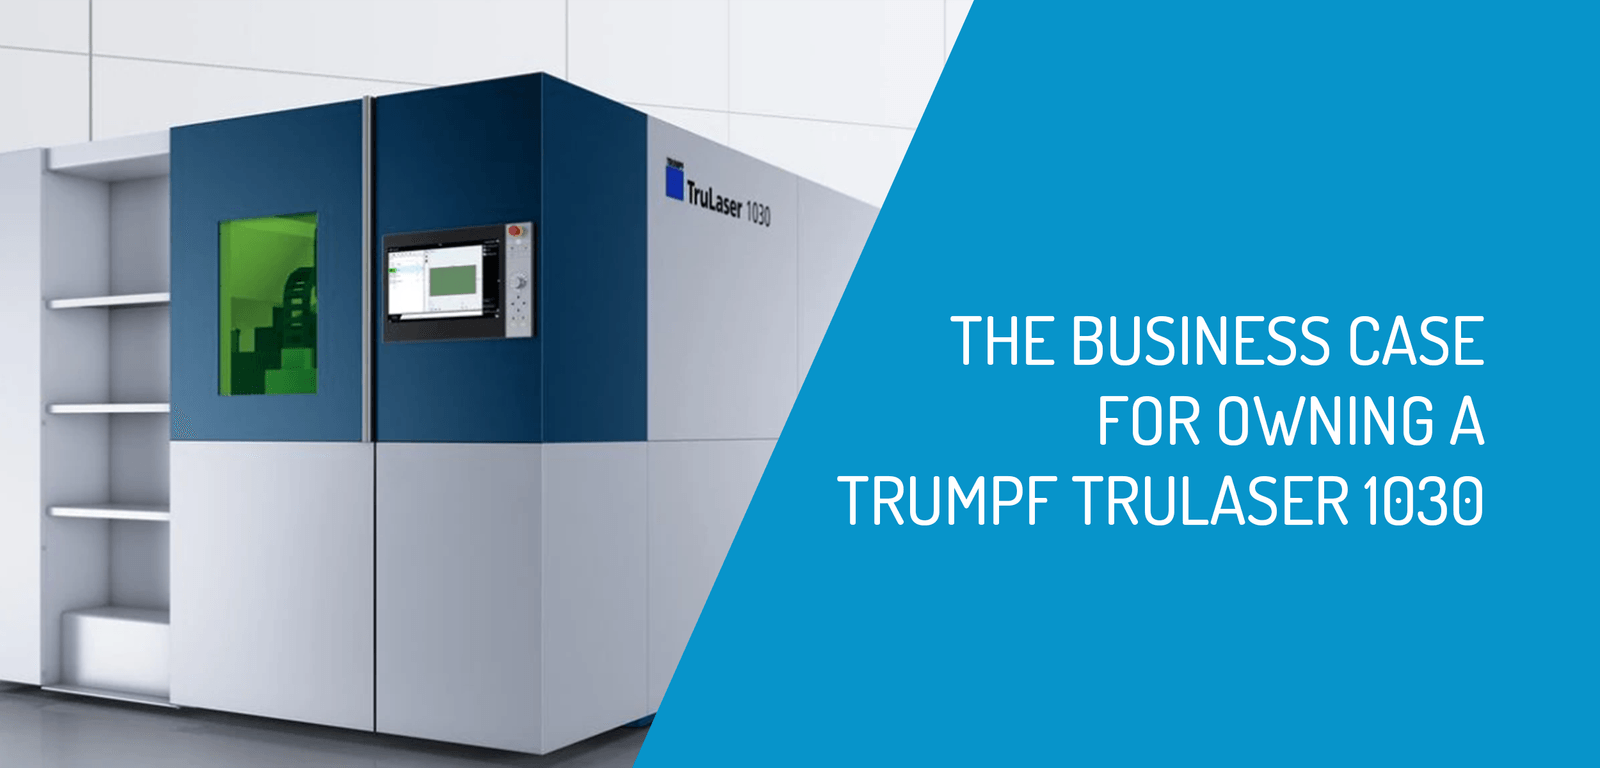 The Business Case For Owning a TRUMPF Trulaser 1030